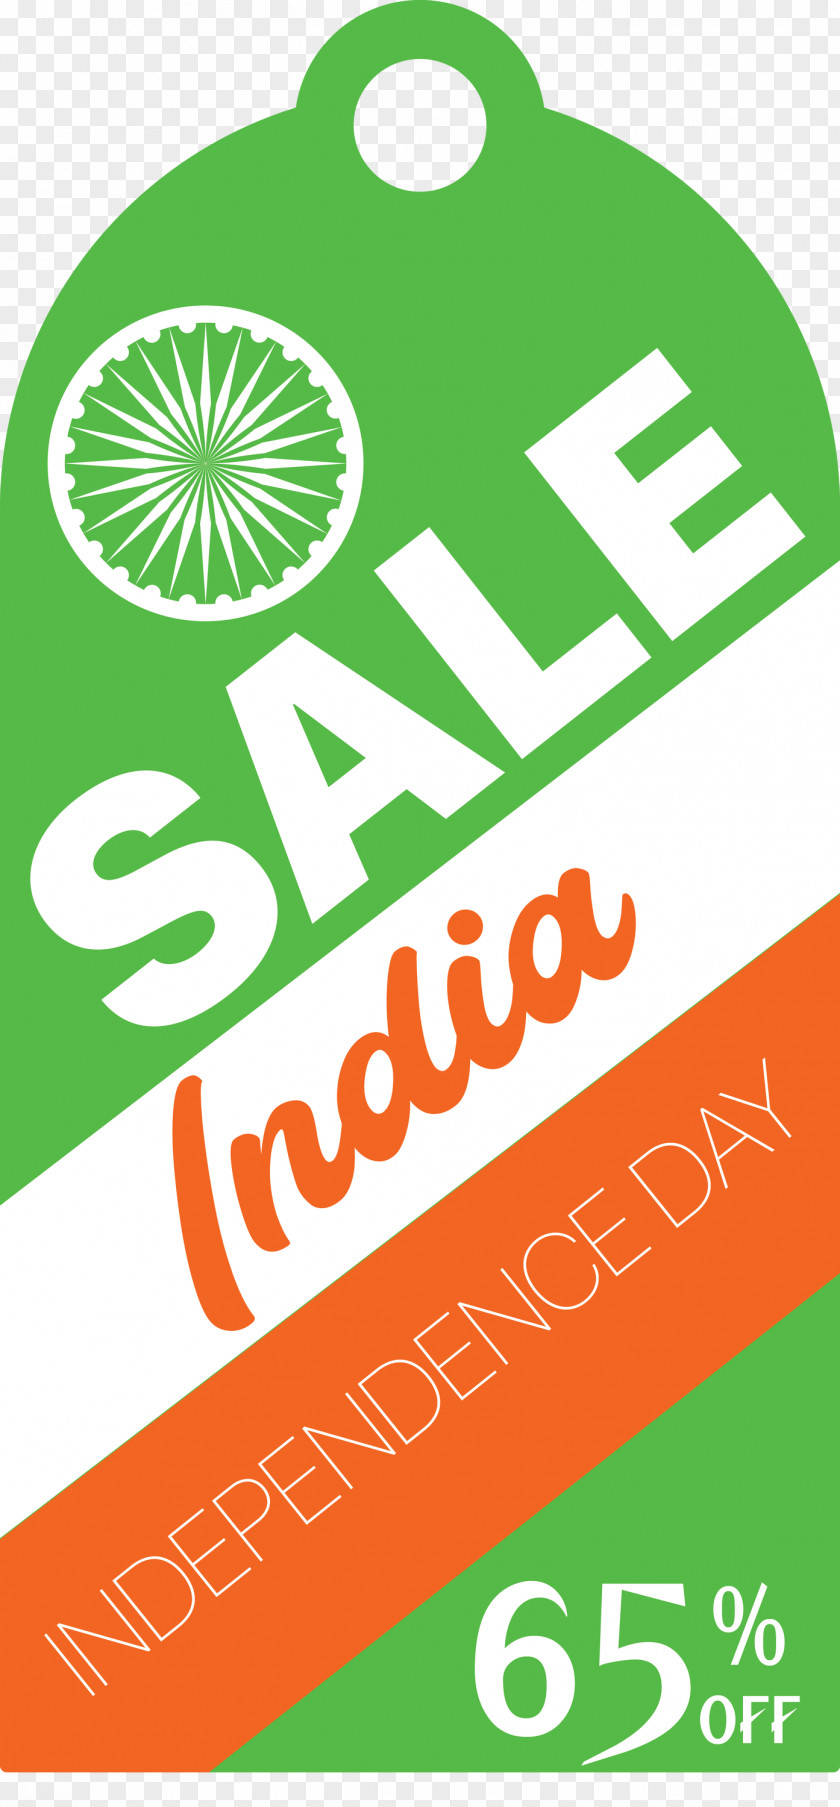 India Indenpendence Day Sale Tag Label PNG